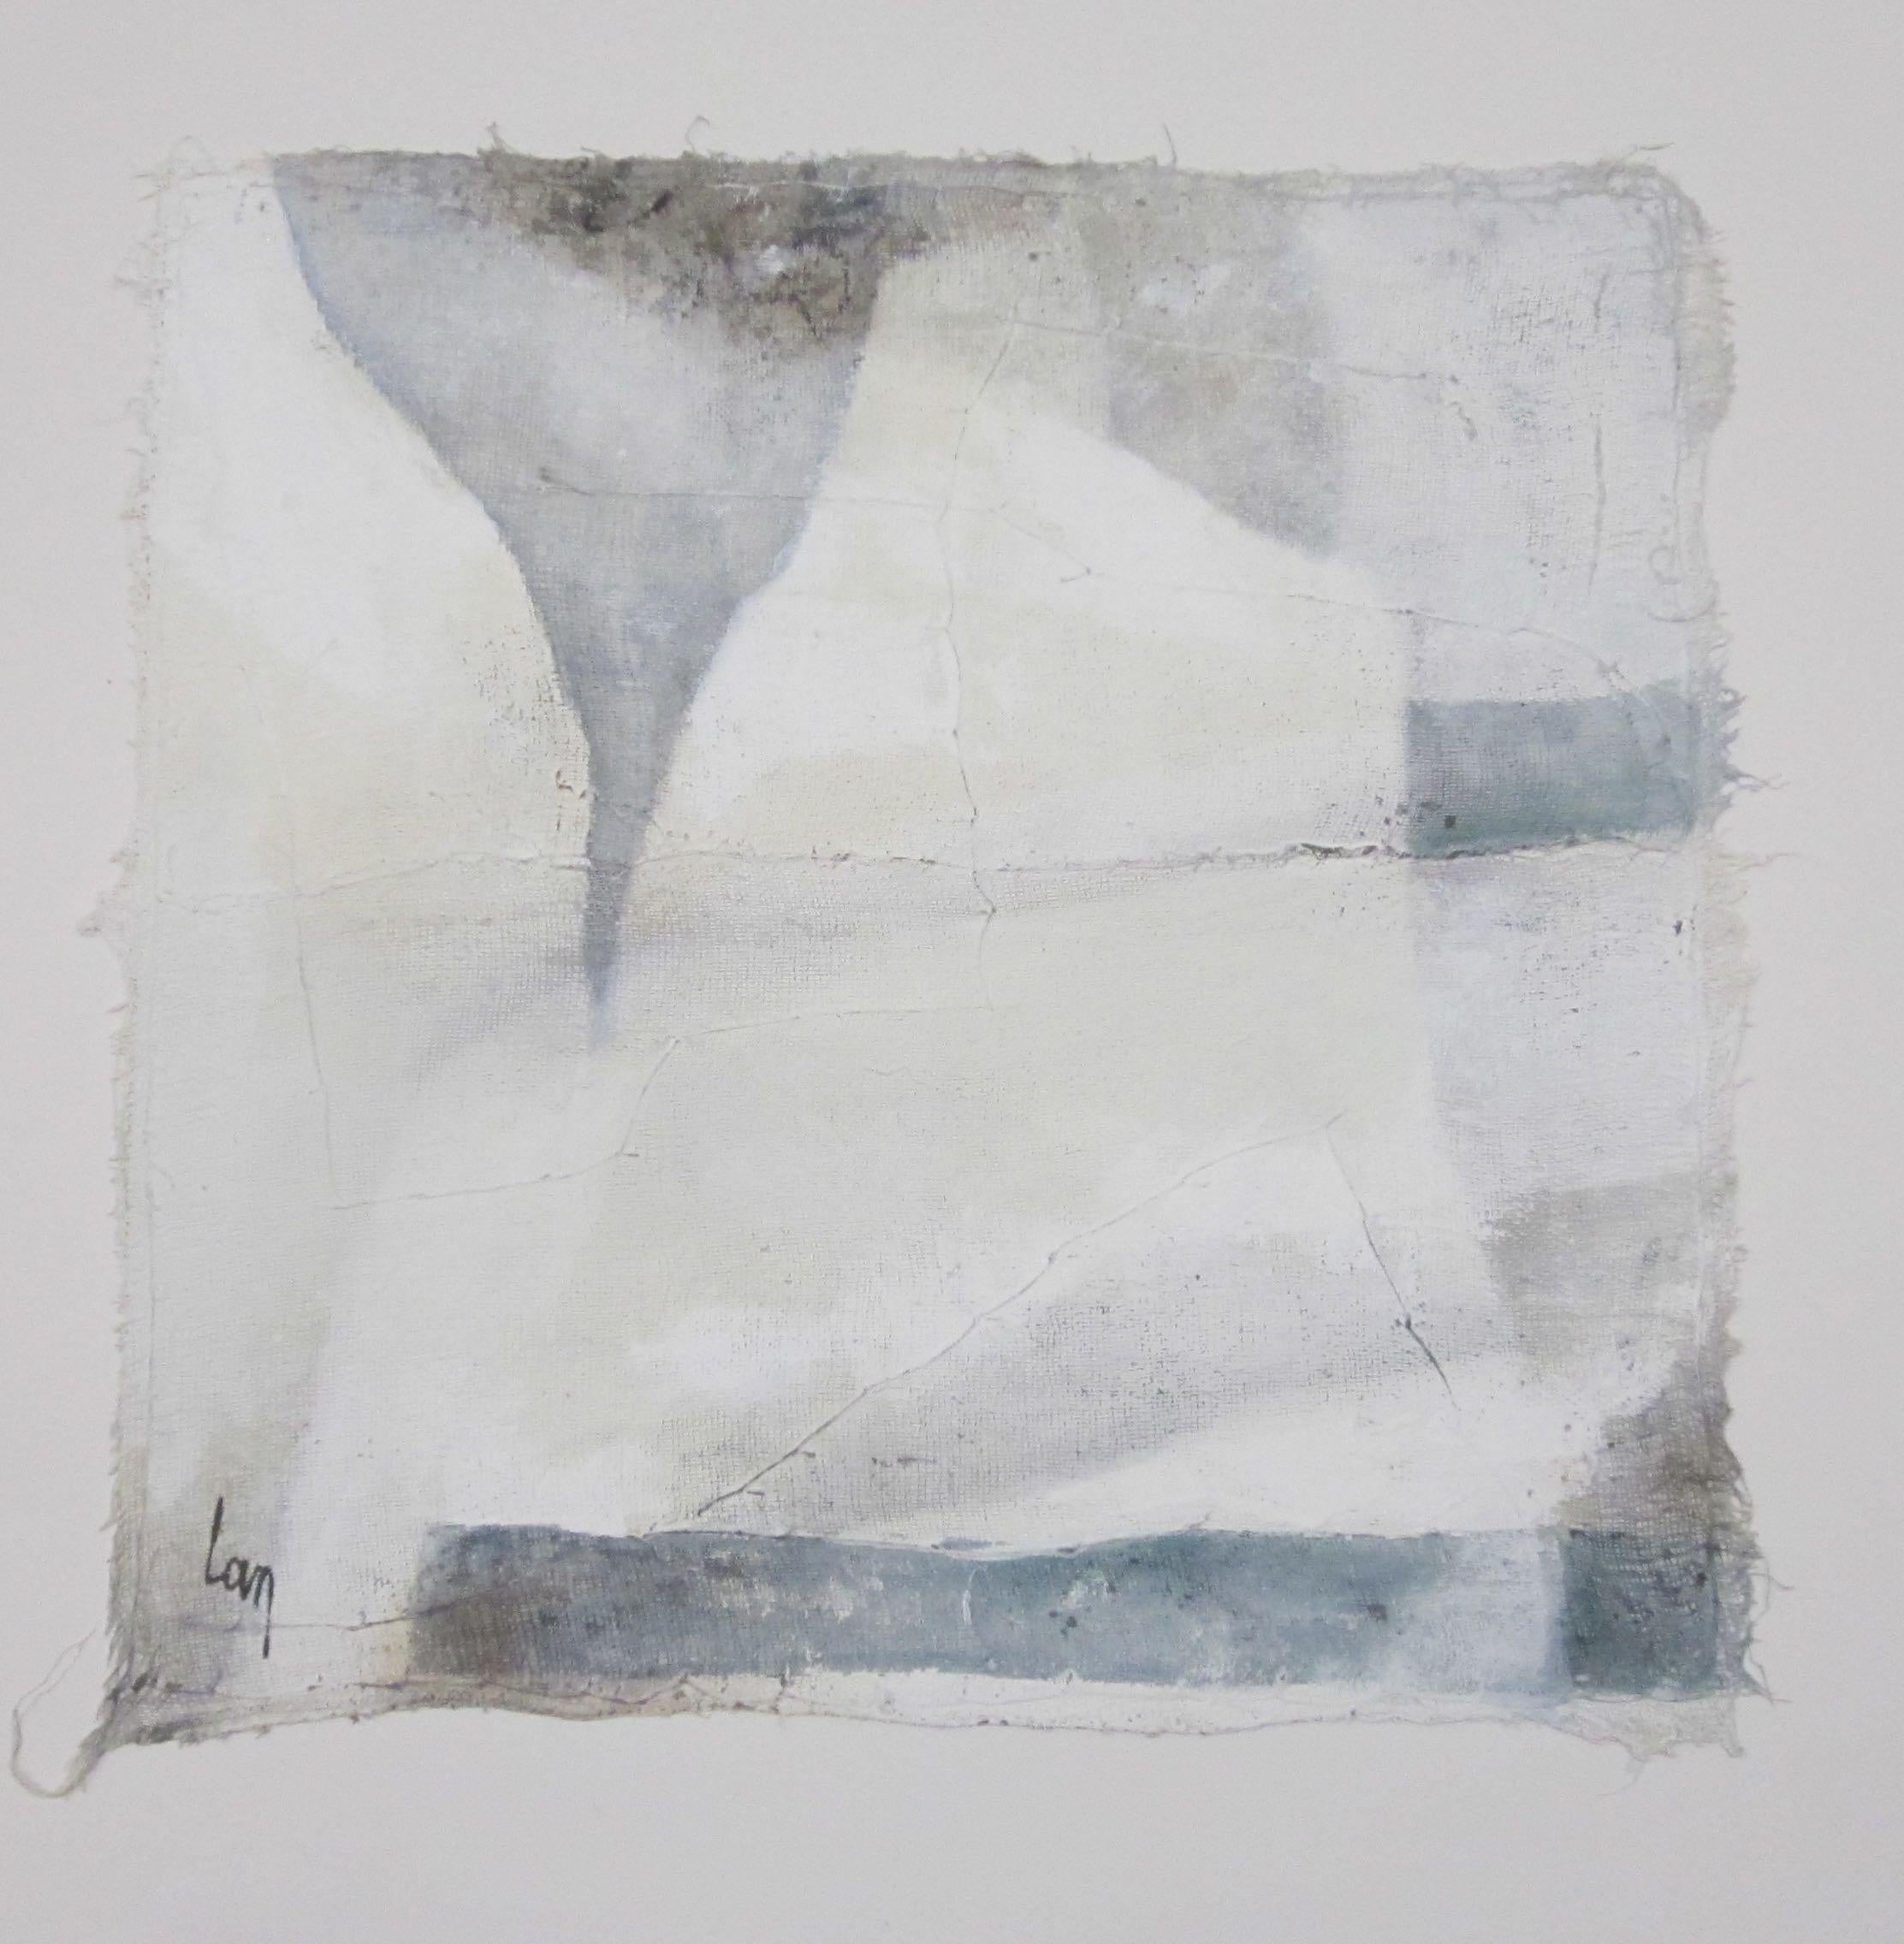 Contemporary abstract acrylic painting by Belgian artist Diane Petry.
Colors are grey, shades of white and blue.
The artist creates her own three layer canvas using pima cotton, gauze and fine paper.
Raw edges and extra thread add texture.
All